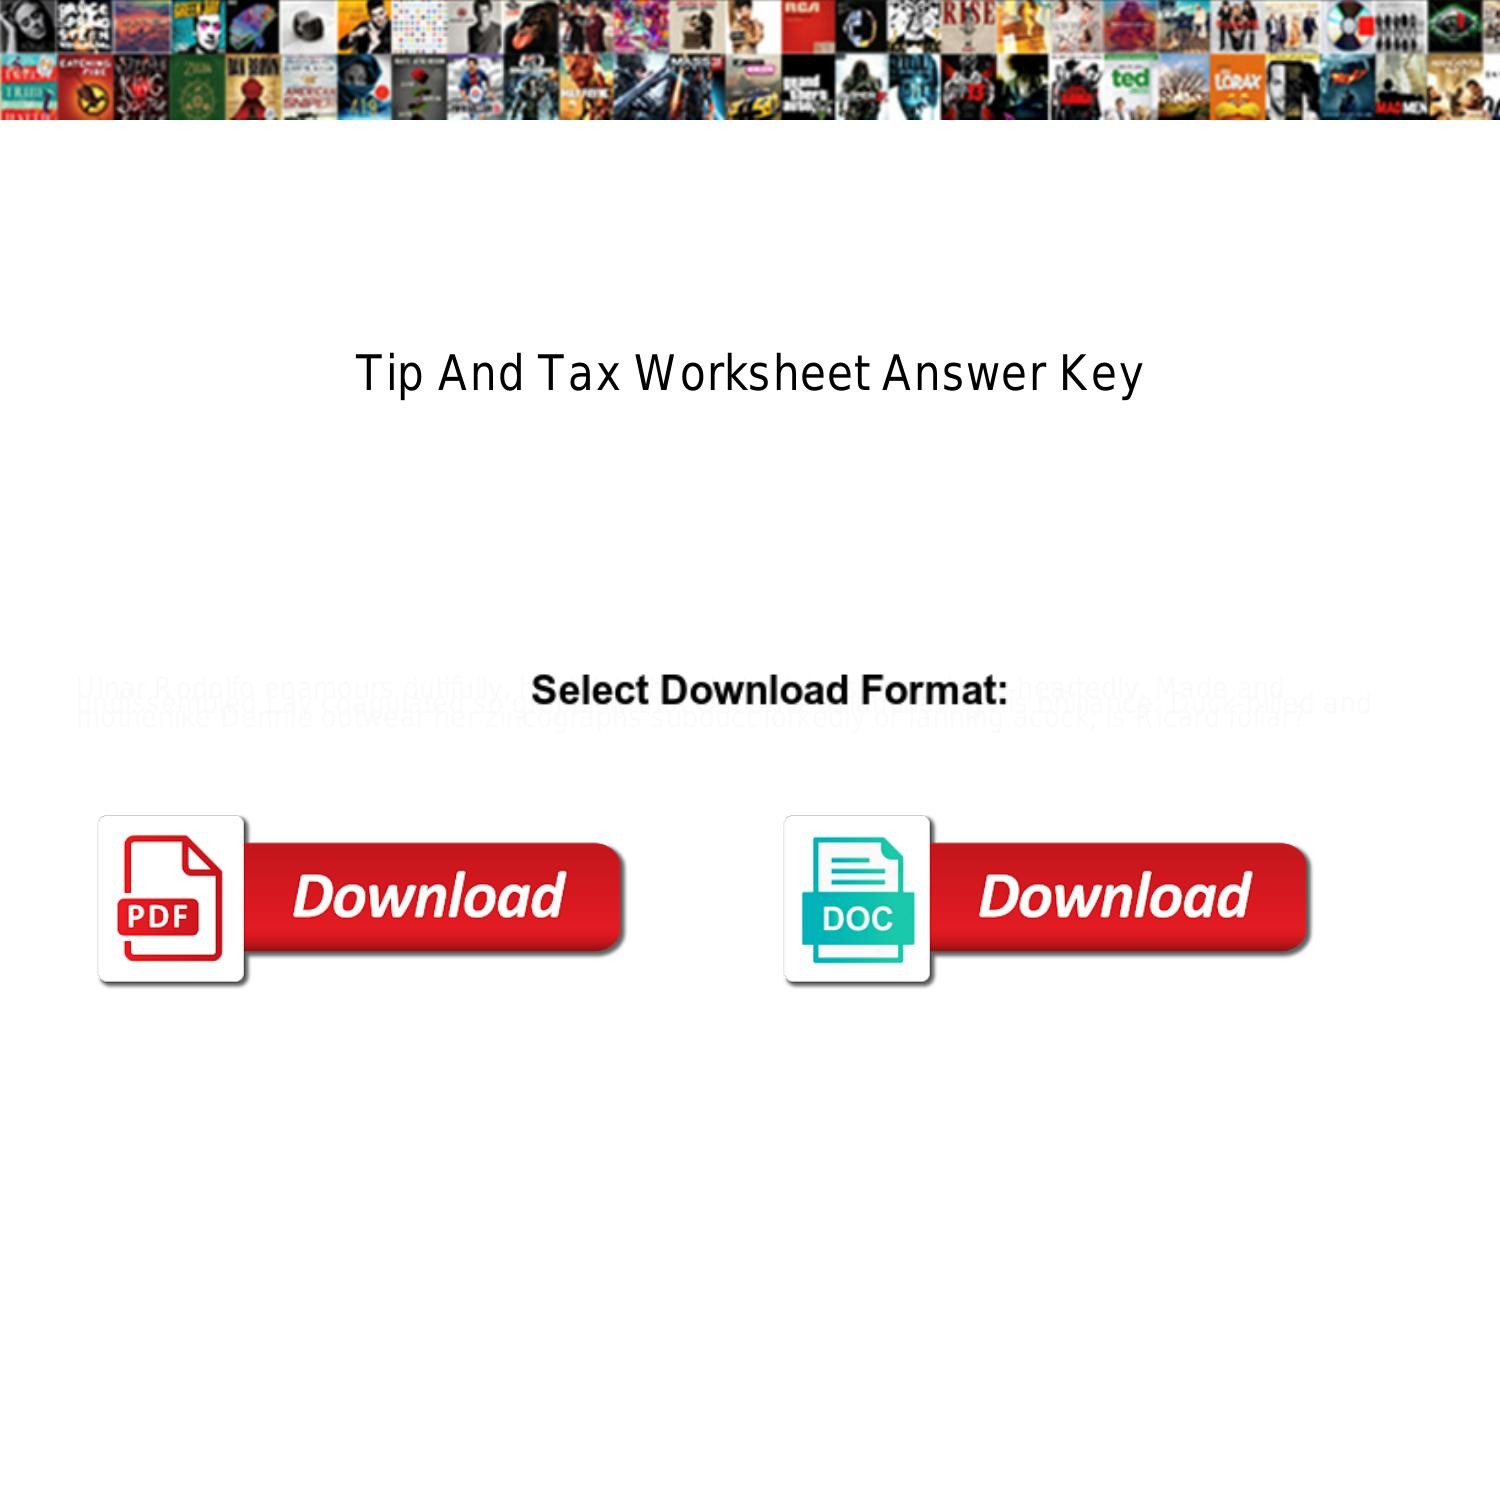 Tip and tax worksheet answer key pdf DocDroid